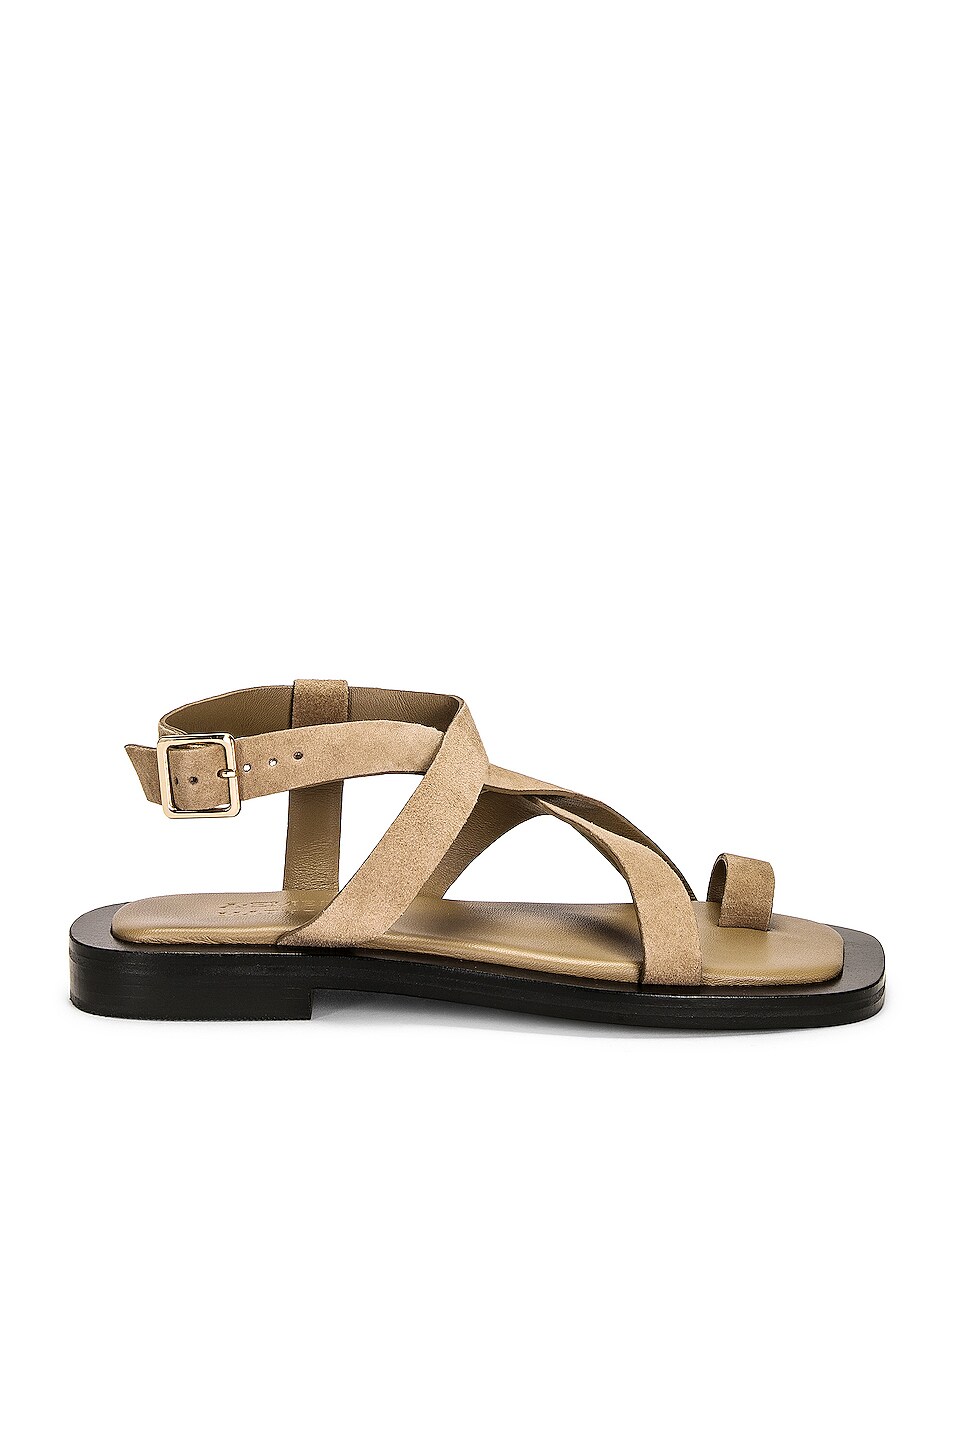 Image 1 of A.EMERY x Matteau Spargi Sandal in Donkey Suede